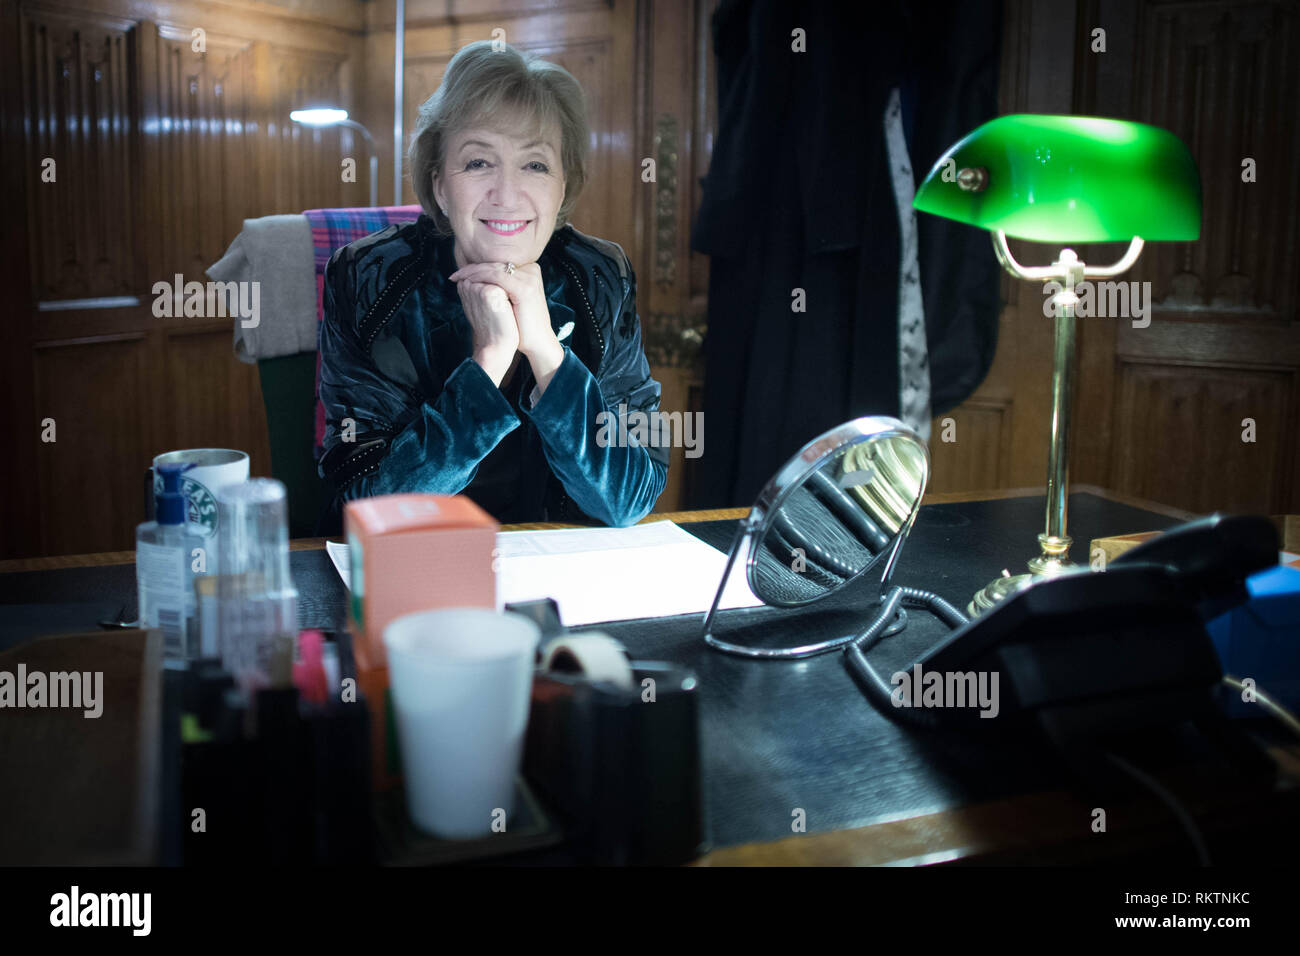 Embargoed to 0001 Wednesday February 13 Leader of the House of Commons, Andrea Leadsom in her office in the Houses of Parliament, London, she said she was Òdesperately keenÓ to Òcrack onÓ with introducing legislation to establish independent statutory bodies to provide governance for Parliament's restoration work. Stock Photo